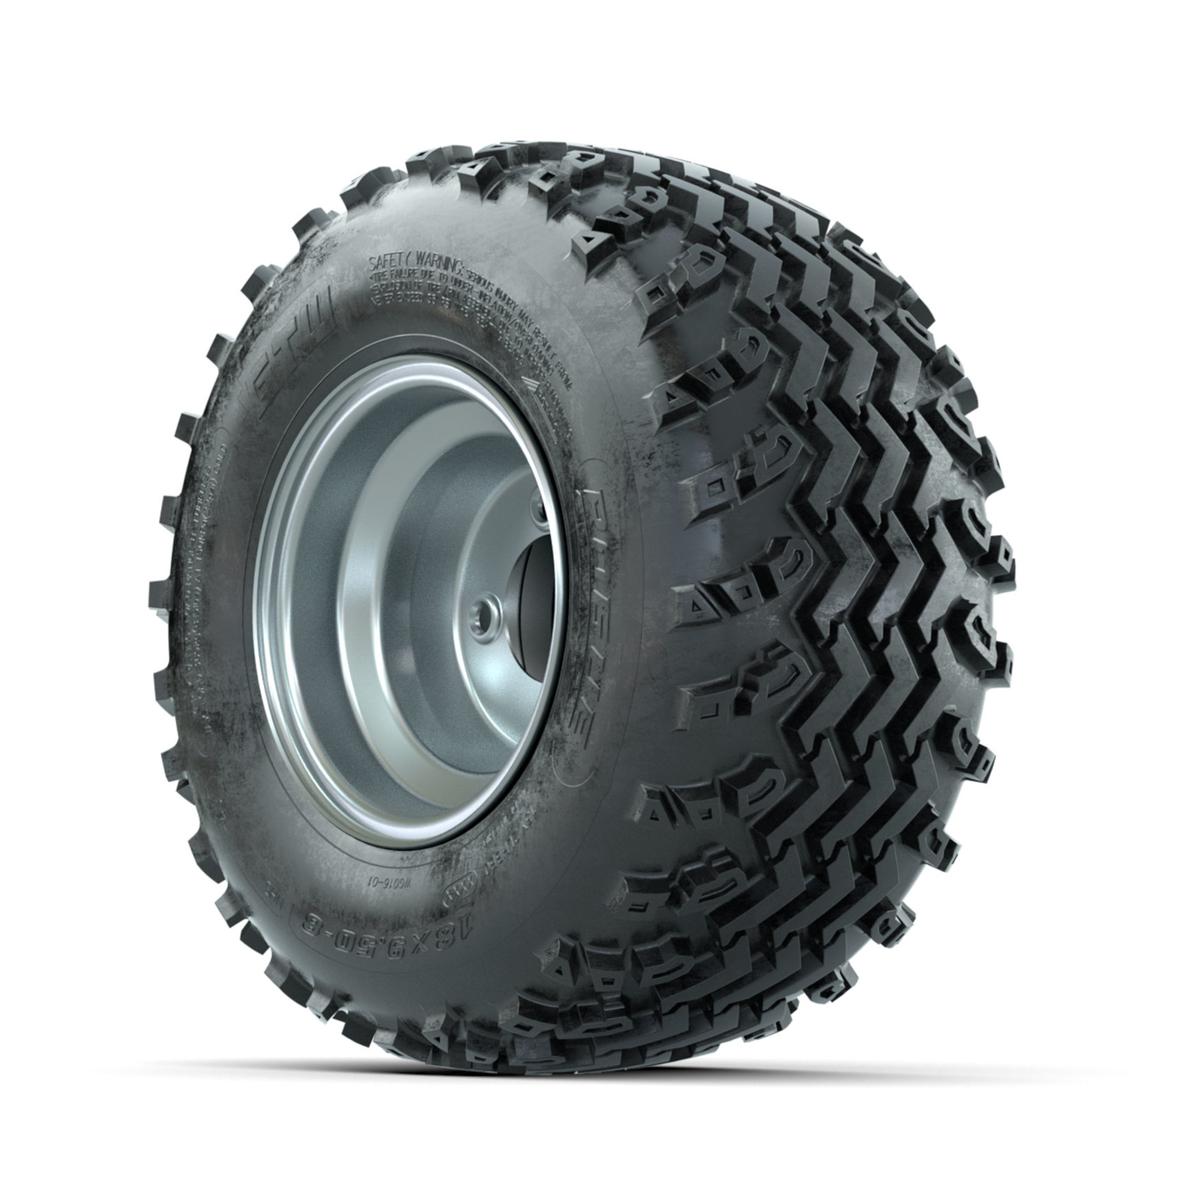 GTW Steel Silver Centered 8 in Wheels with 18x9.50-8 Rogue All Terrain Tires – Full Set